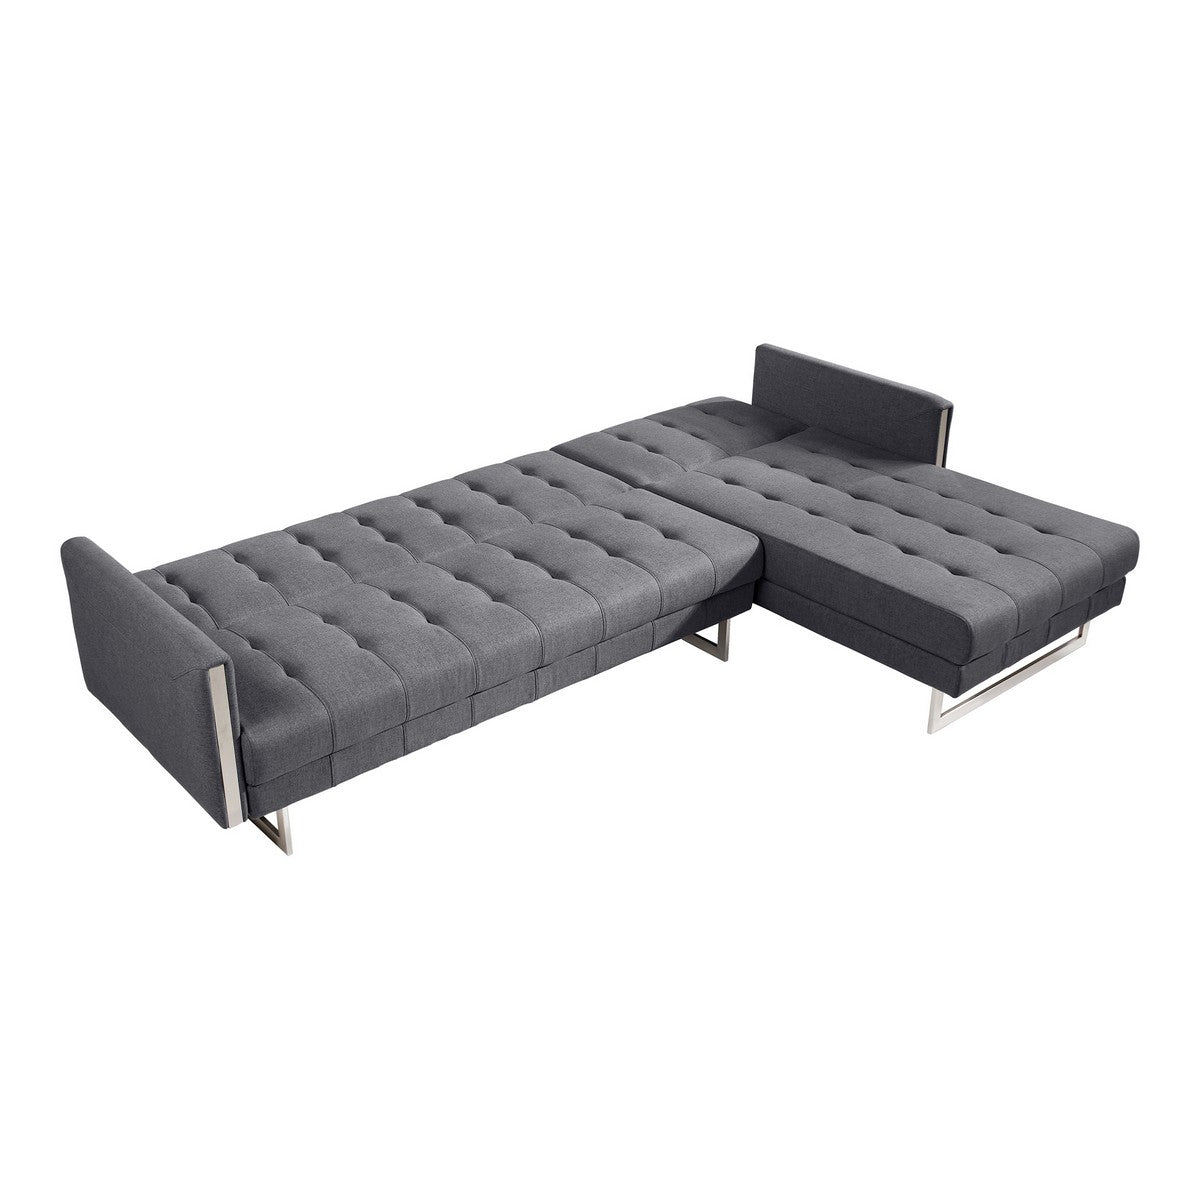 Moe's Home Collection Palomino Sofa Bed Right Dark Grey - MT-1003-15-R